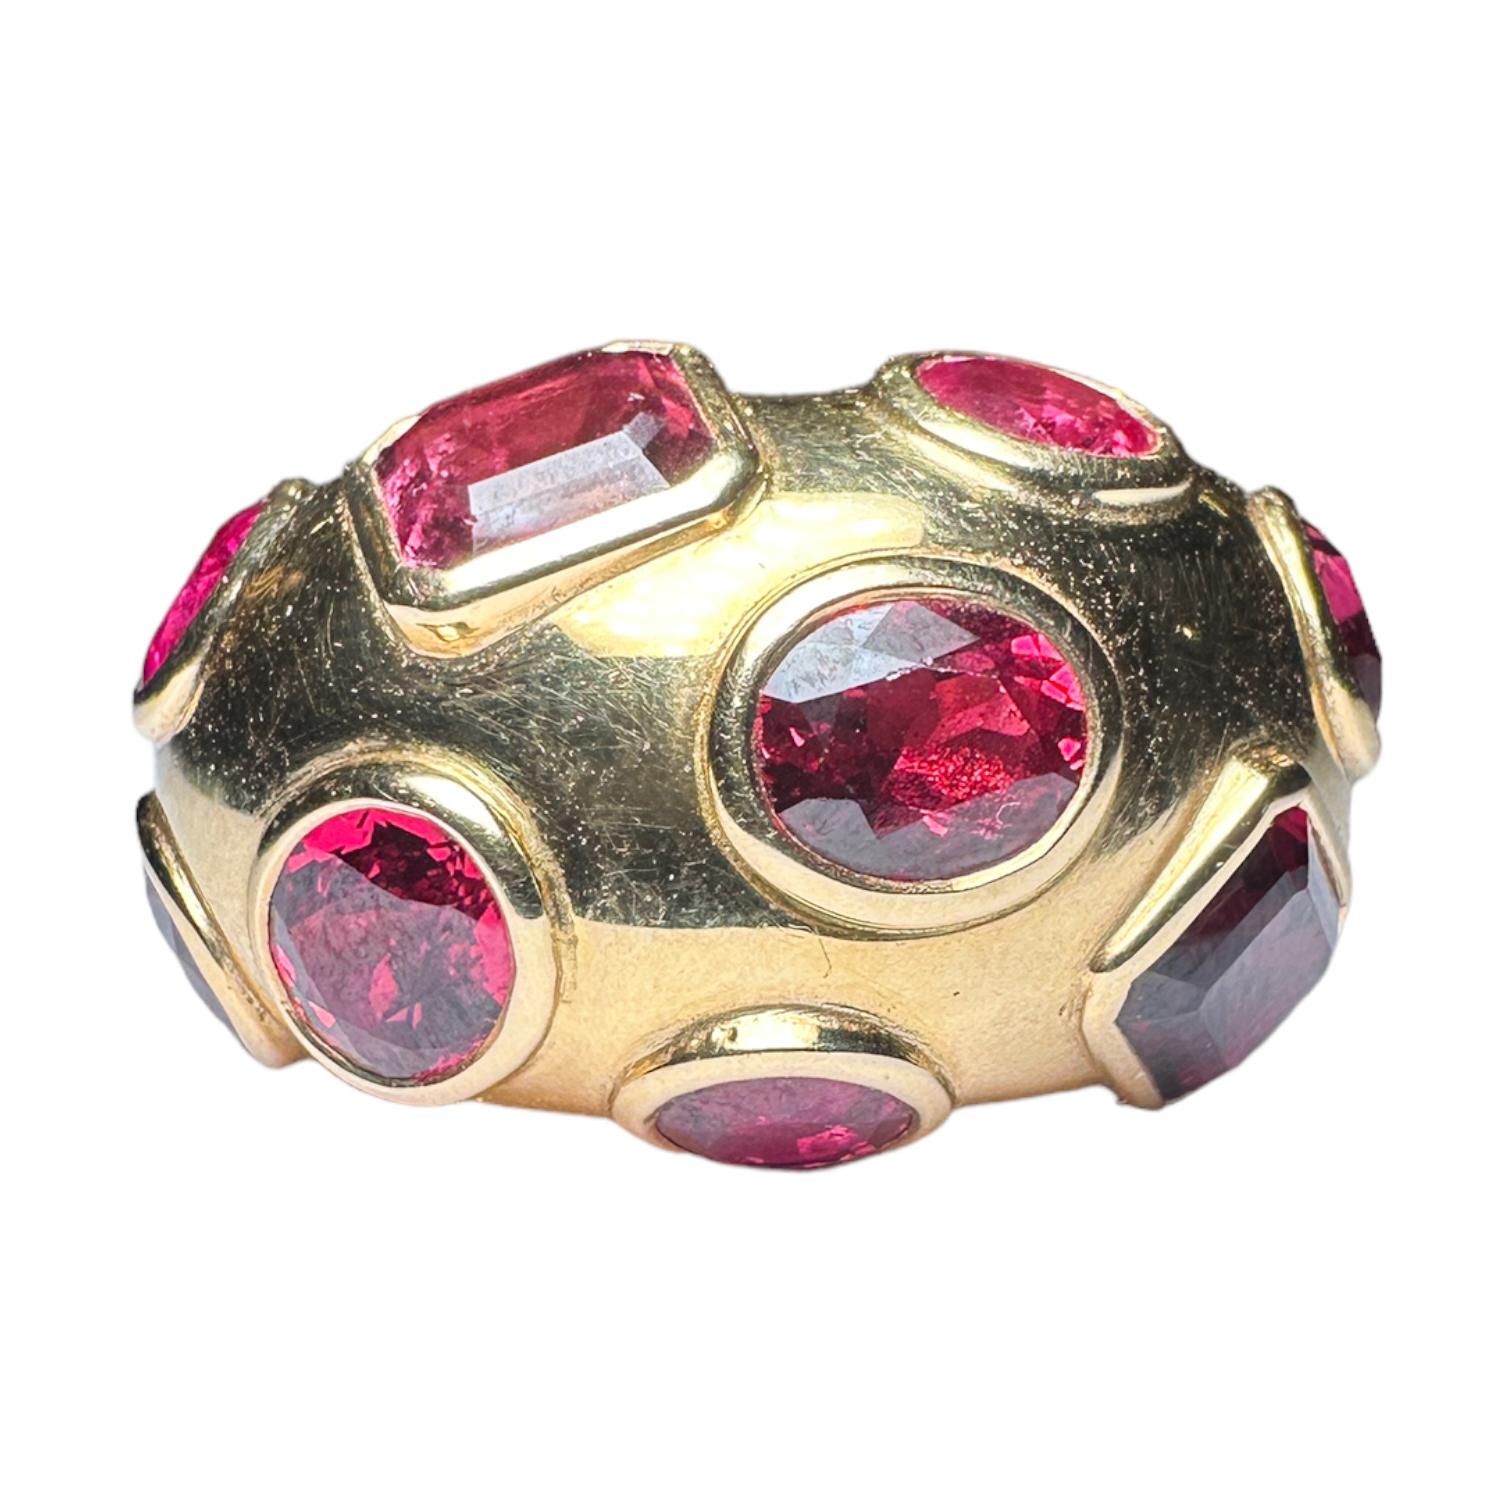 18k Gold Ring with Rubies, Rubellite Tourmalines and Red Spinels For Sale 3